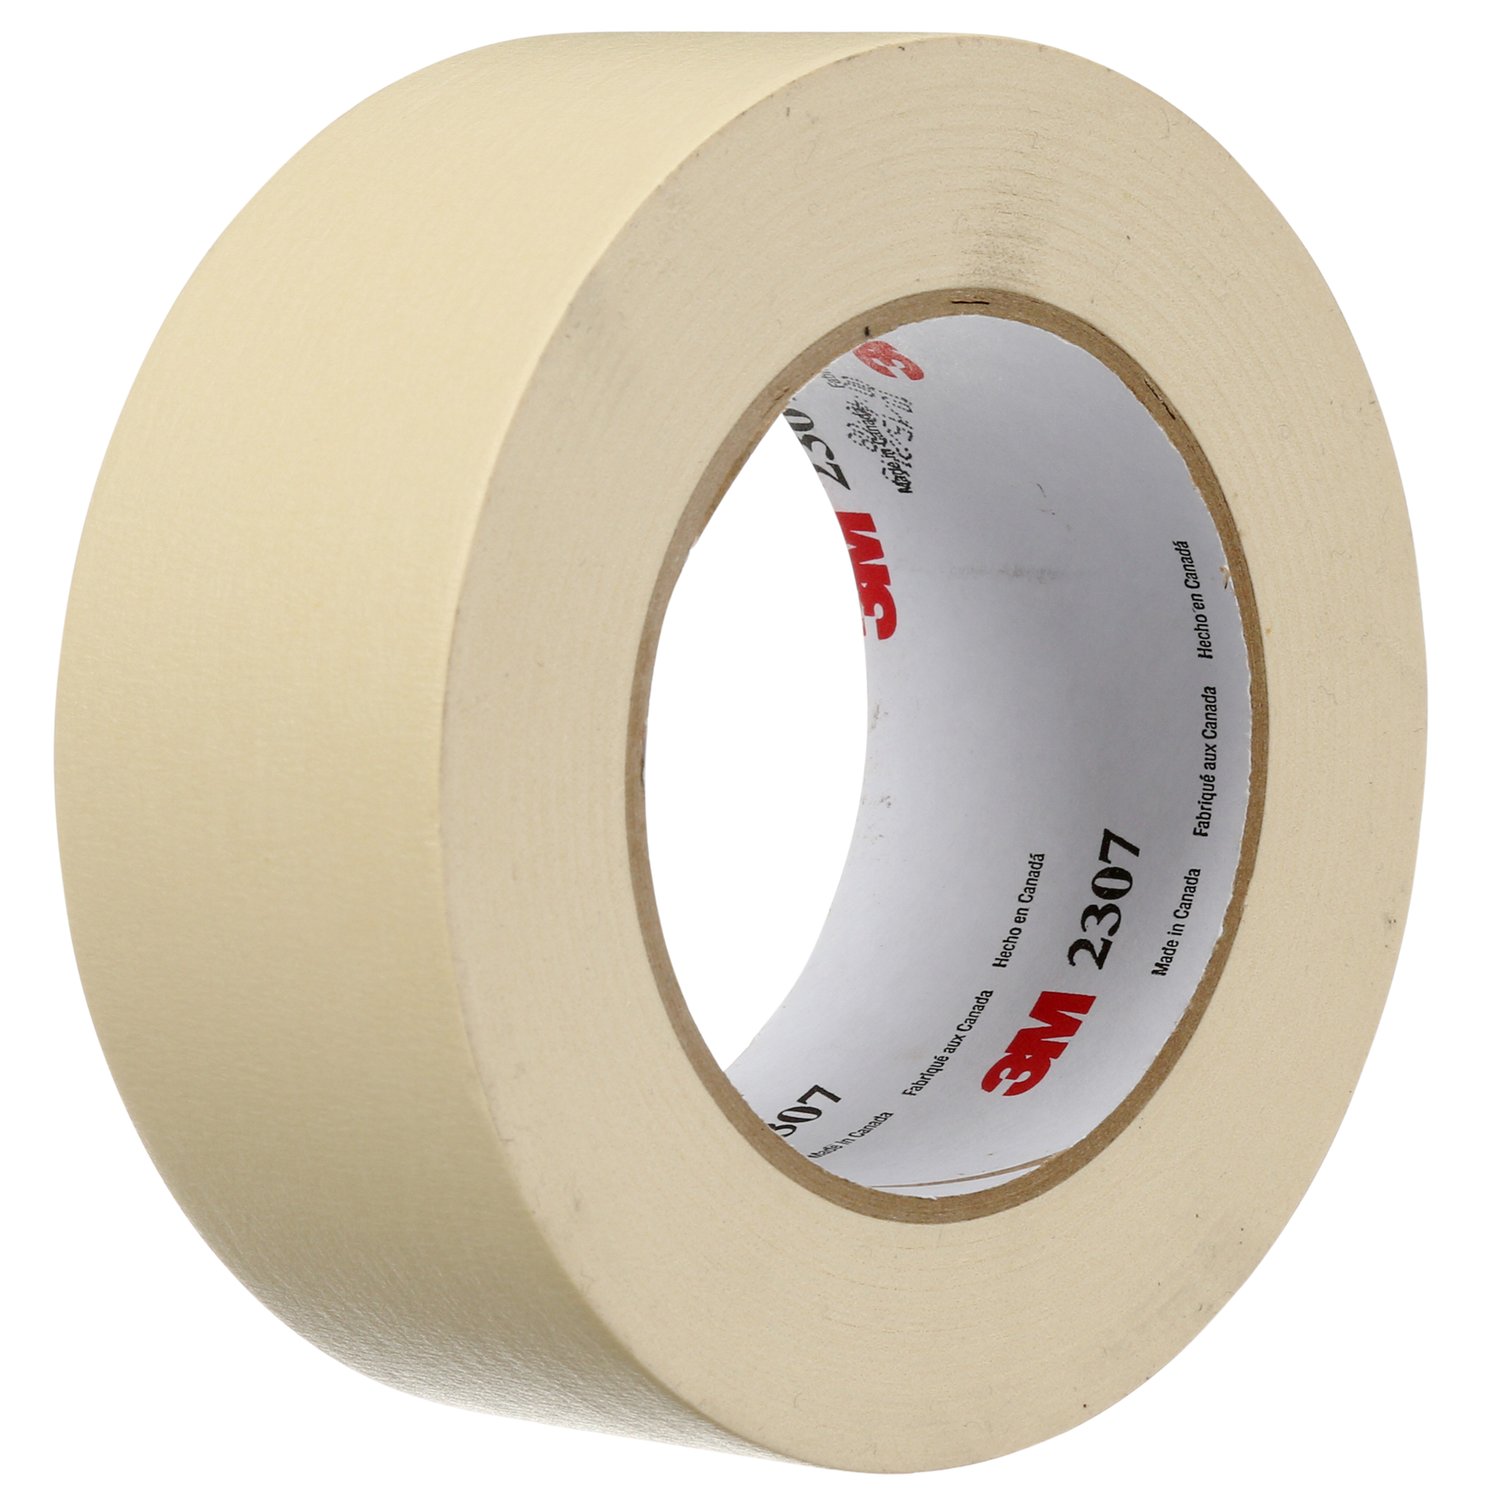 00021200711206, 3M Masking Tape 2307, Tan, 48 mm x 55 m, 5.2 mil, 24  Roll/Case, Aircraft products, 3M